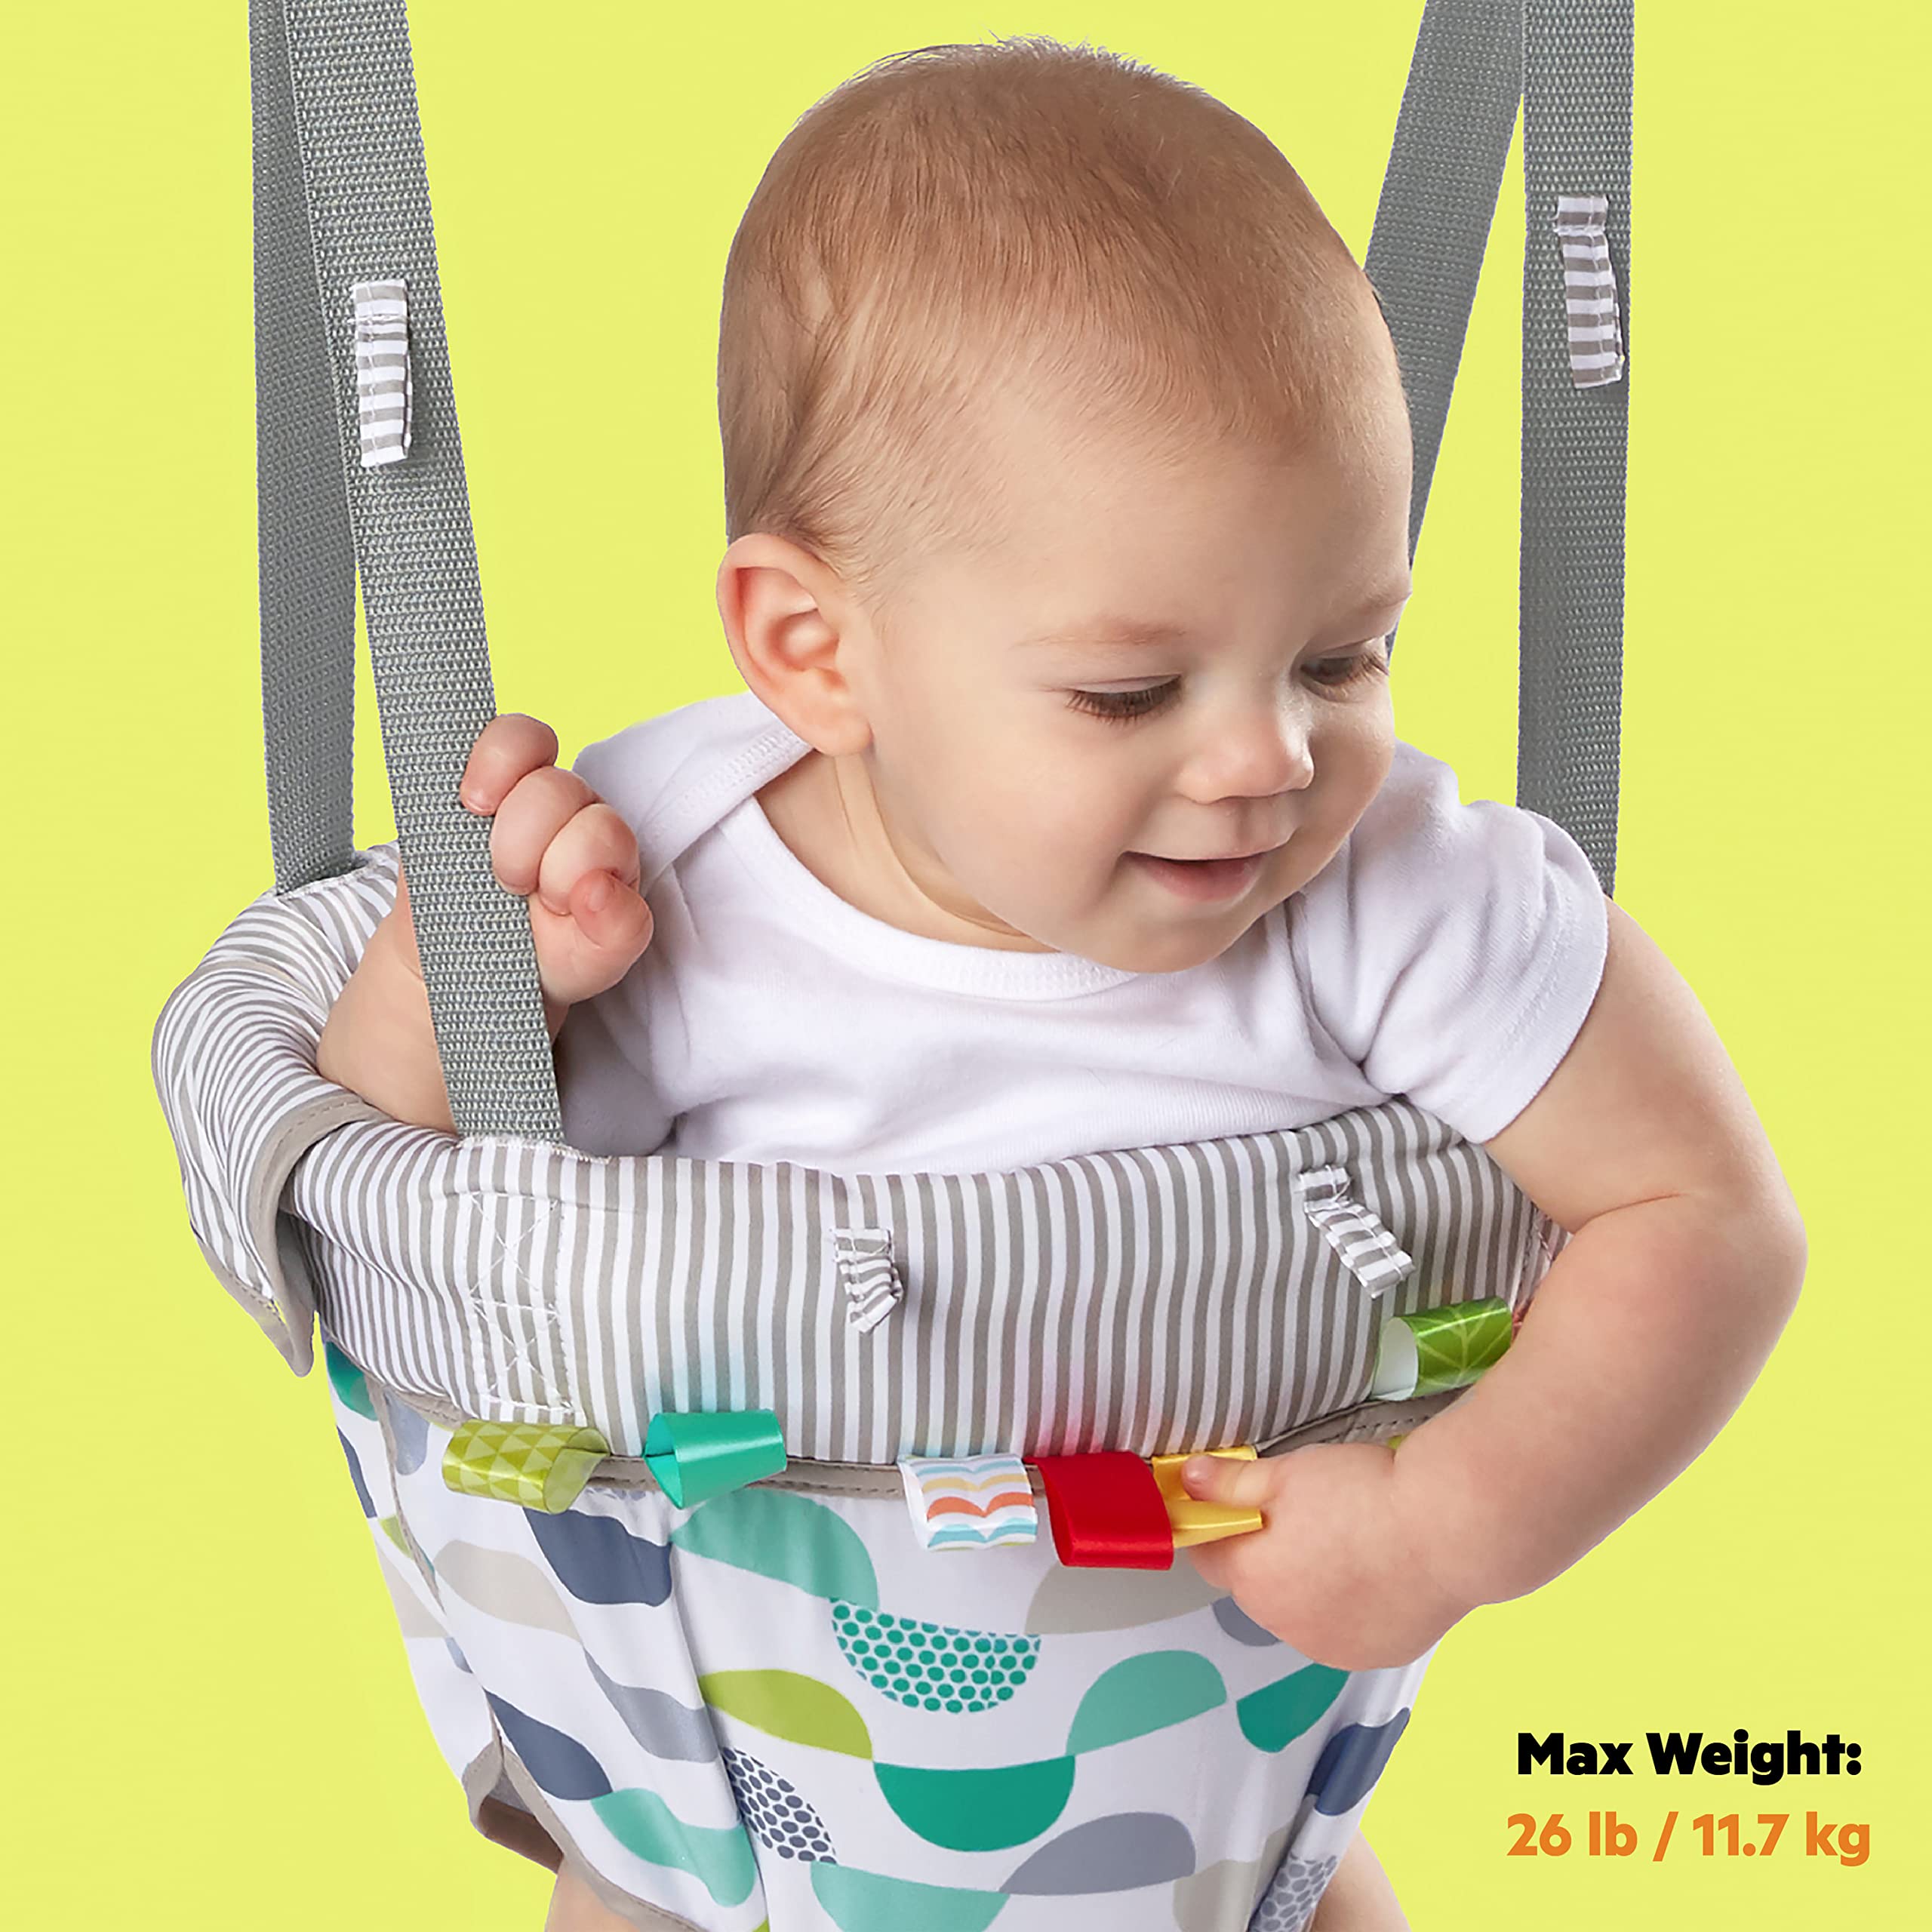 Bright Starts Playful Parade Door Jumper for Baby with Adjustable Strap, 6 Months and Up, Max Weight 26 lbs